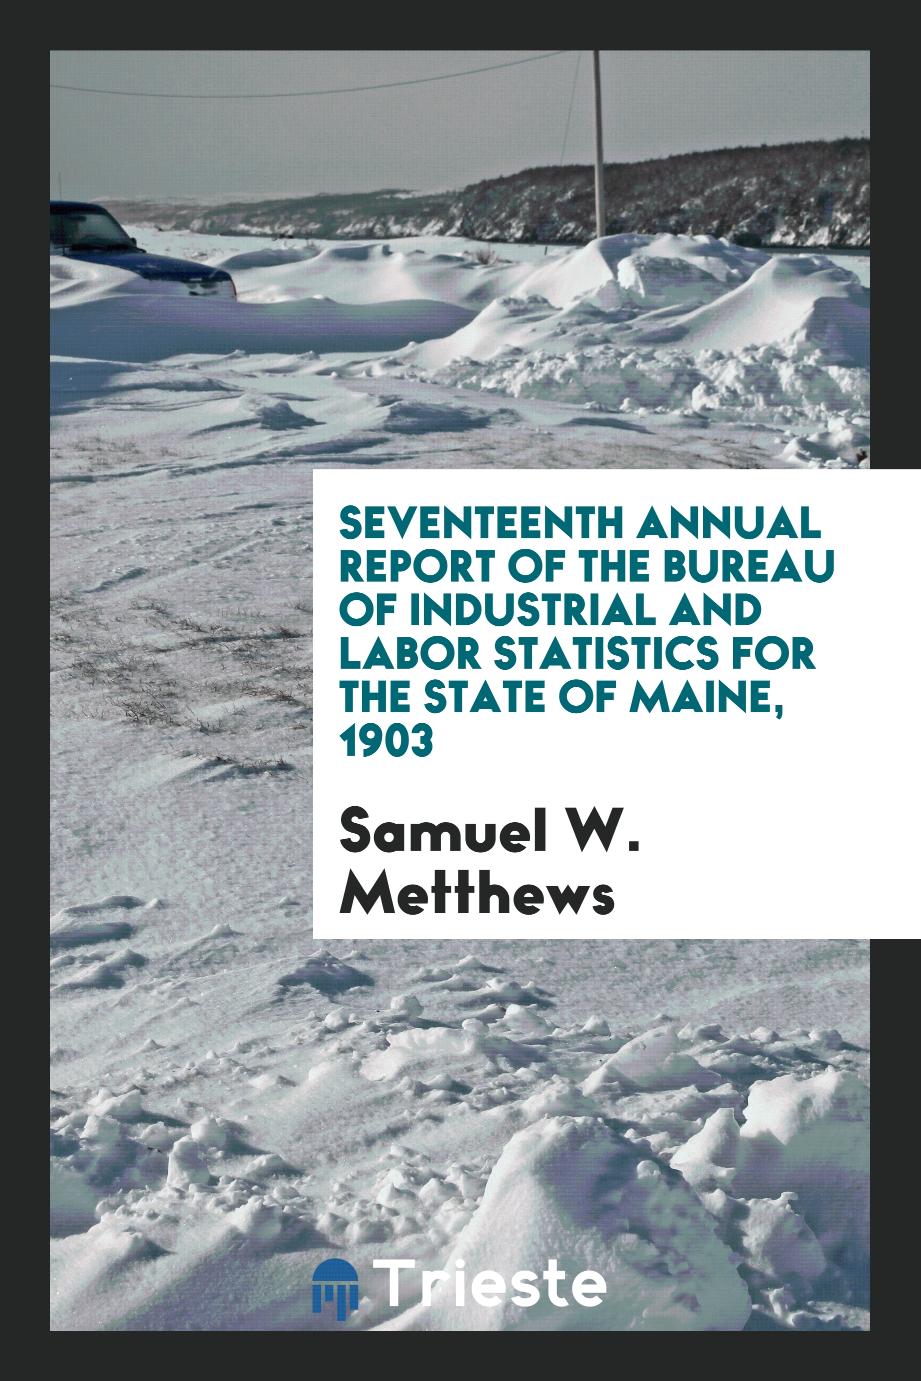 Seventeenth Annual Report of the Bureau of Industrial and Labor Statistics for the State of Maine, 1903